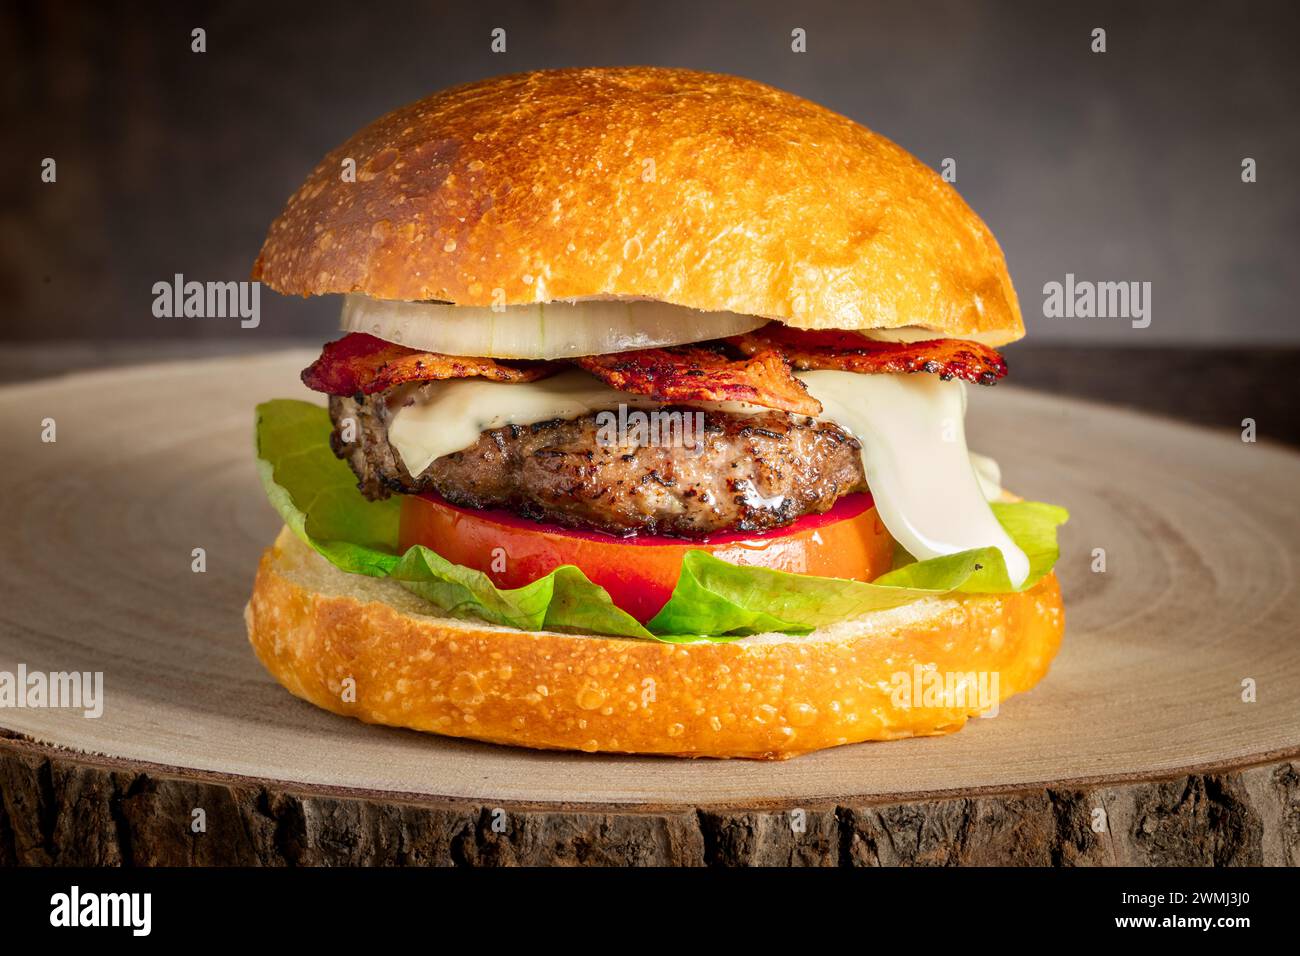 homemade cheeseburger with fresh lettuce tomato onion crispy bacon juicy beef burger and melted cheese in a bun served on a natural wood log platter Stock Photo